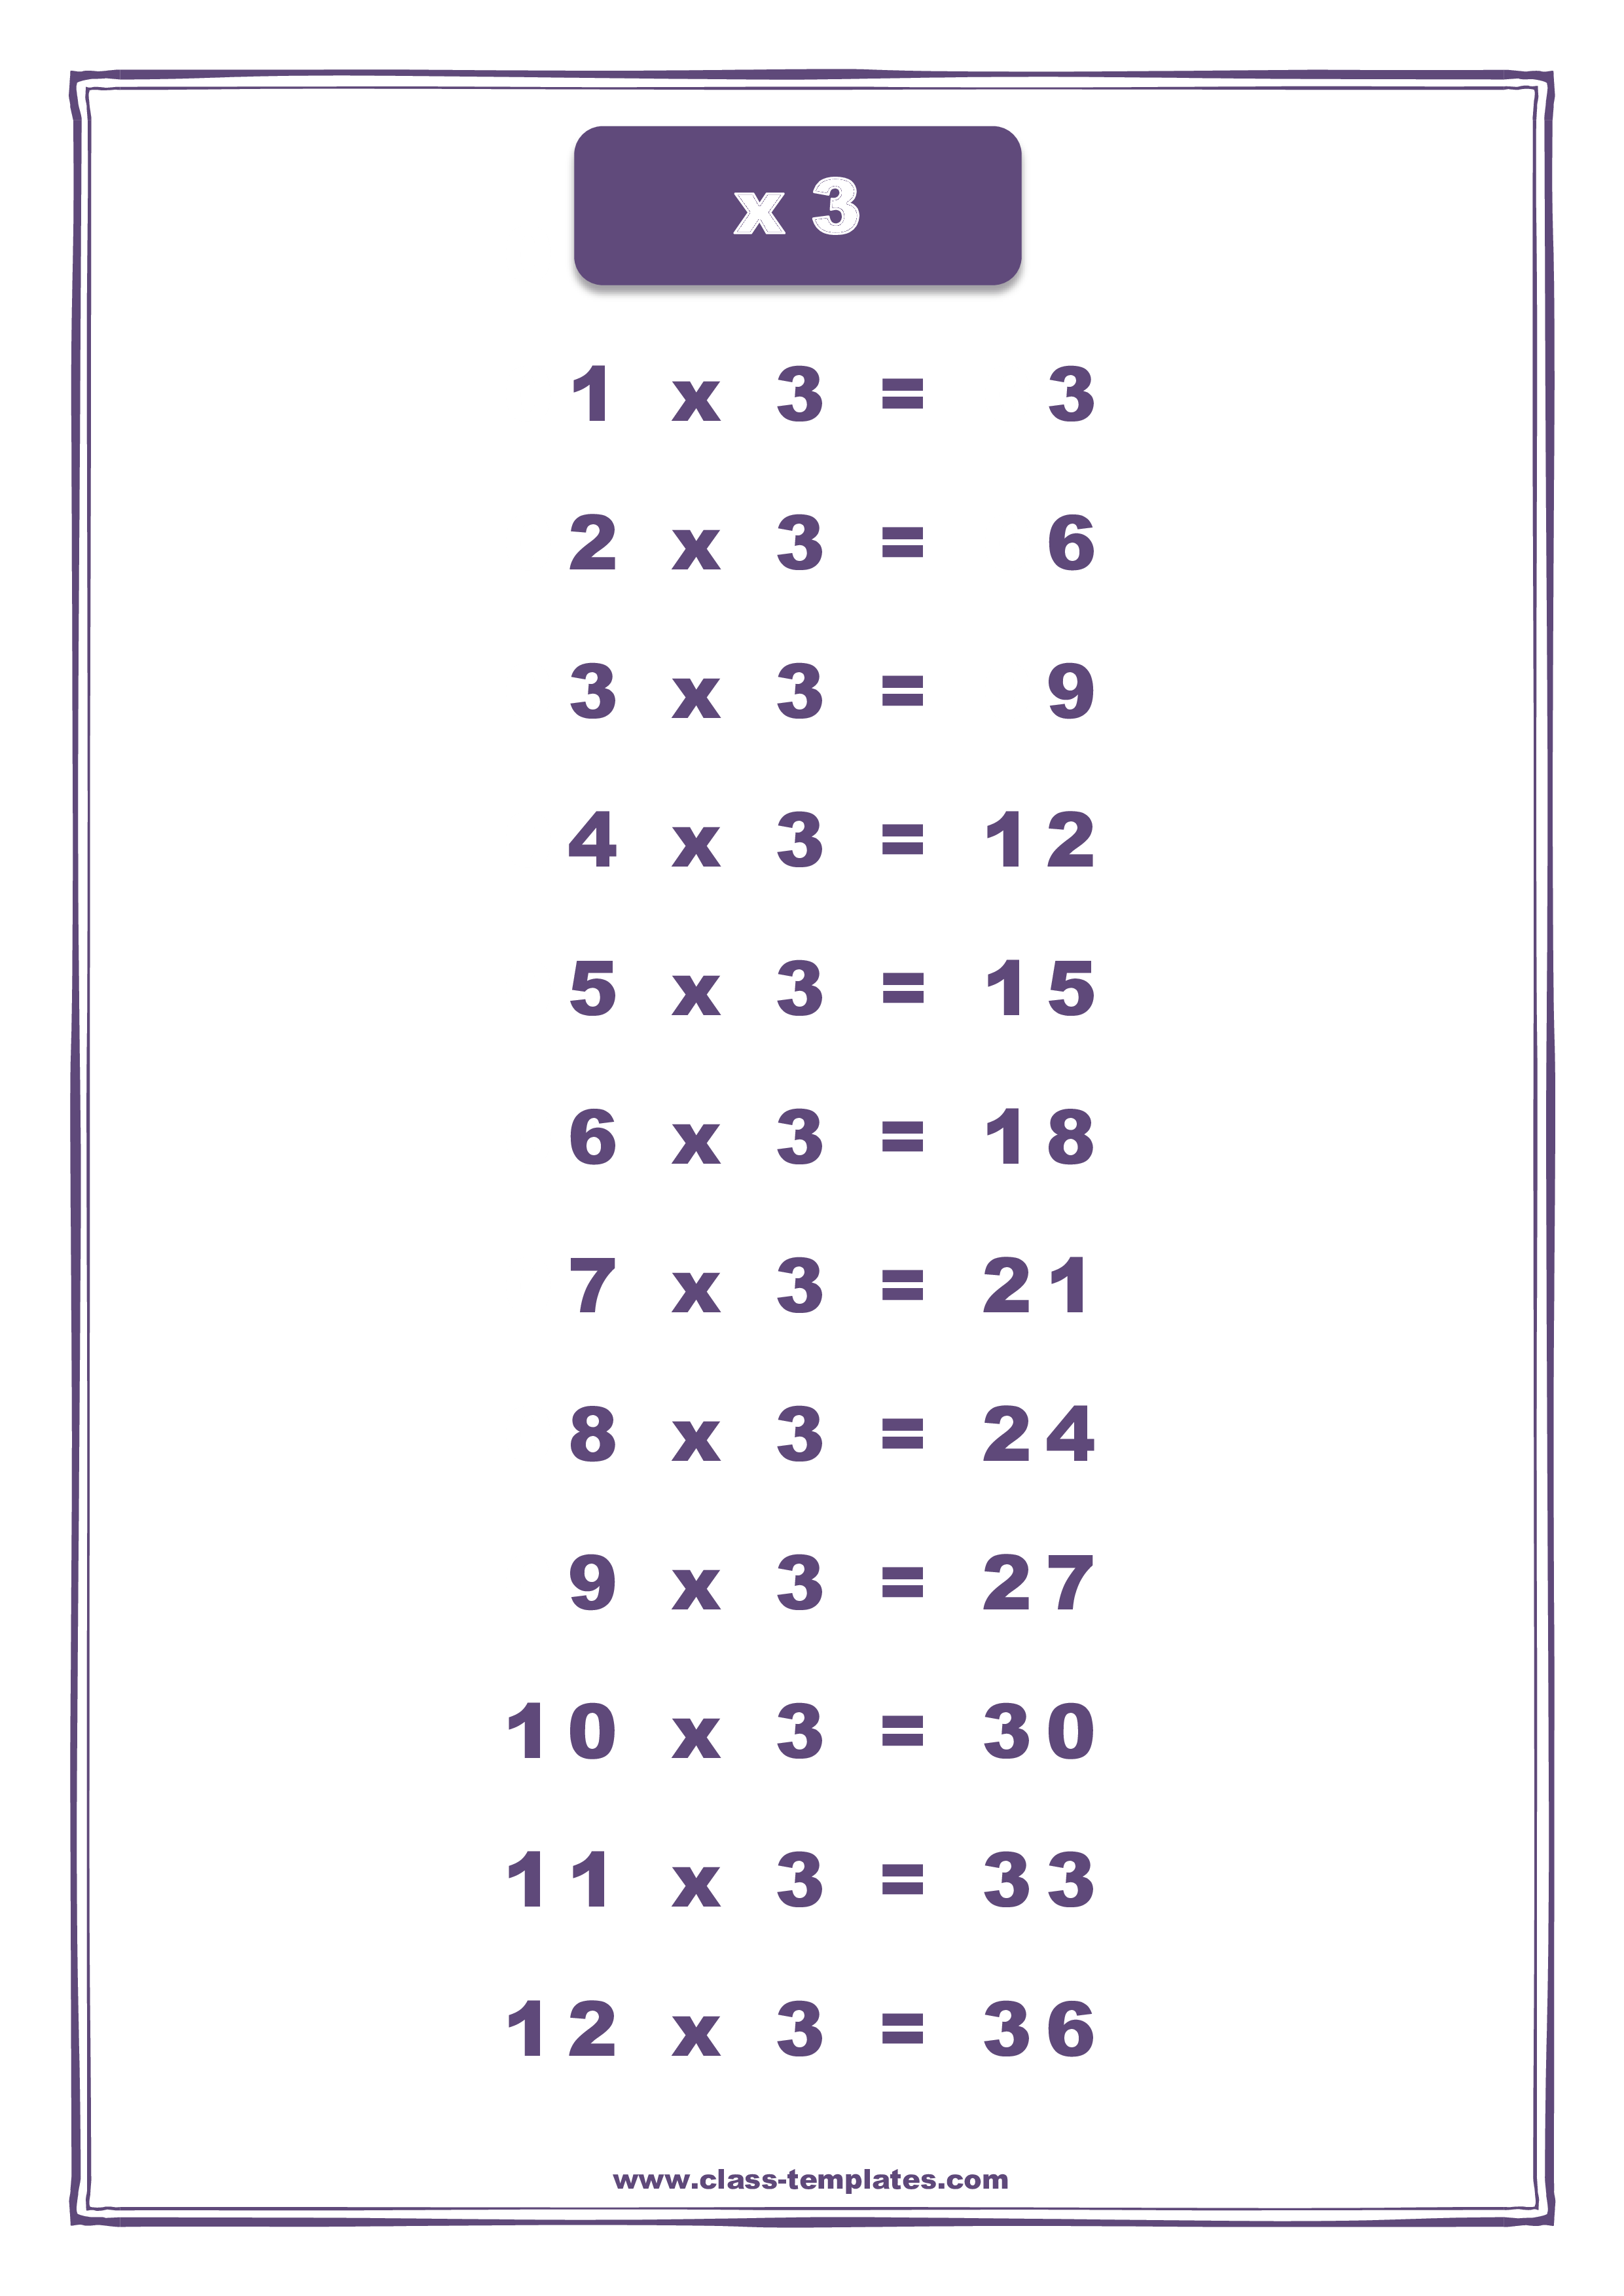 x3 times table chart template